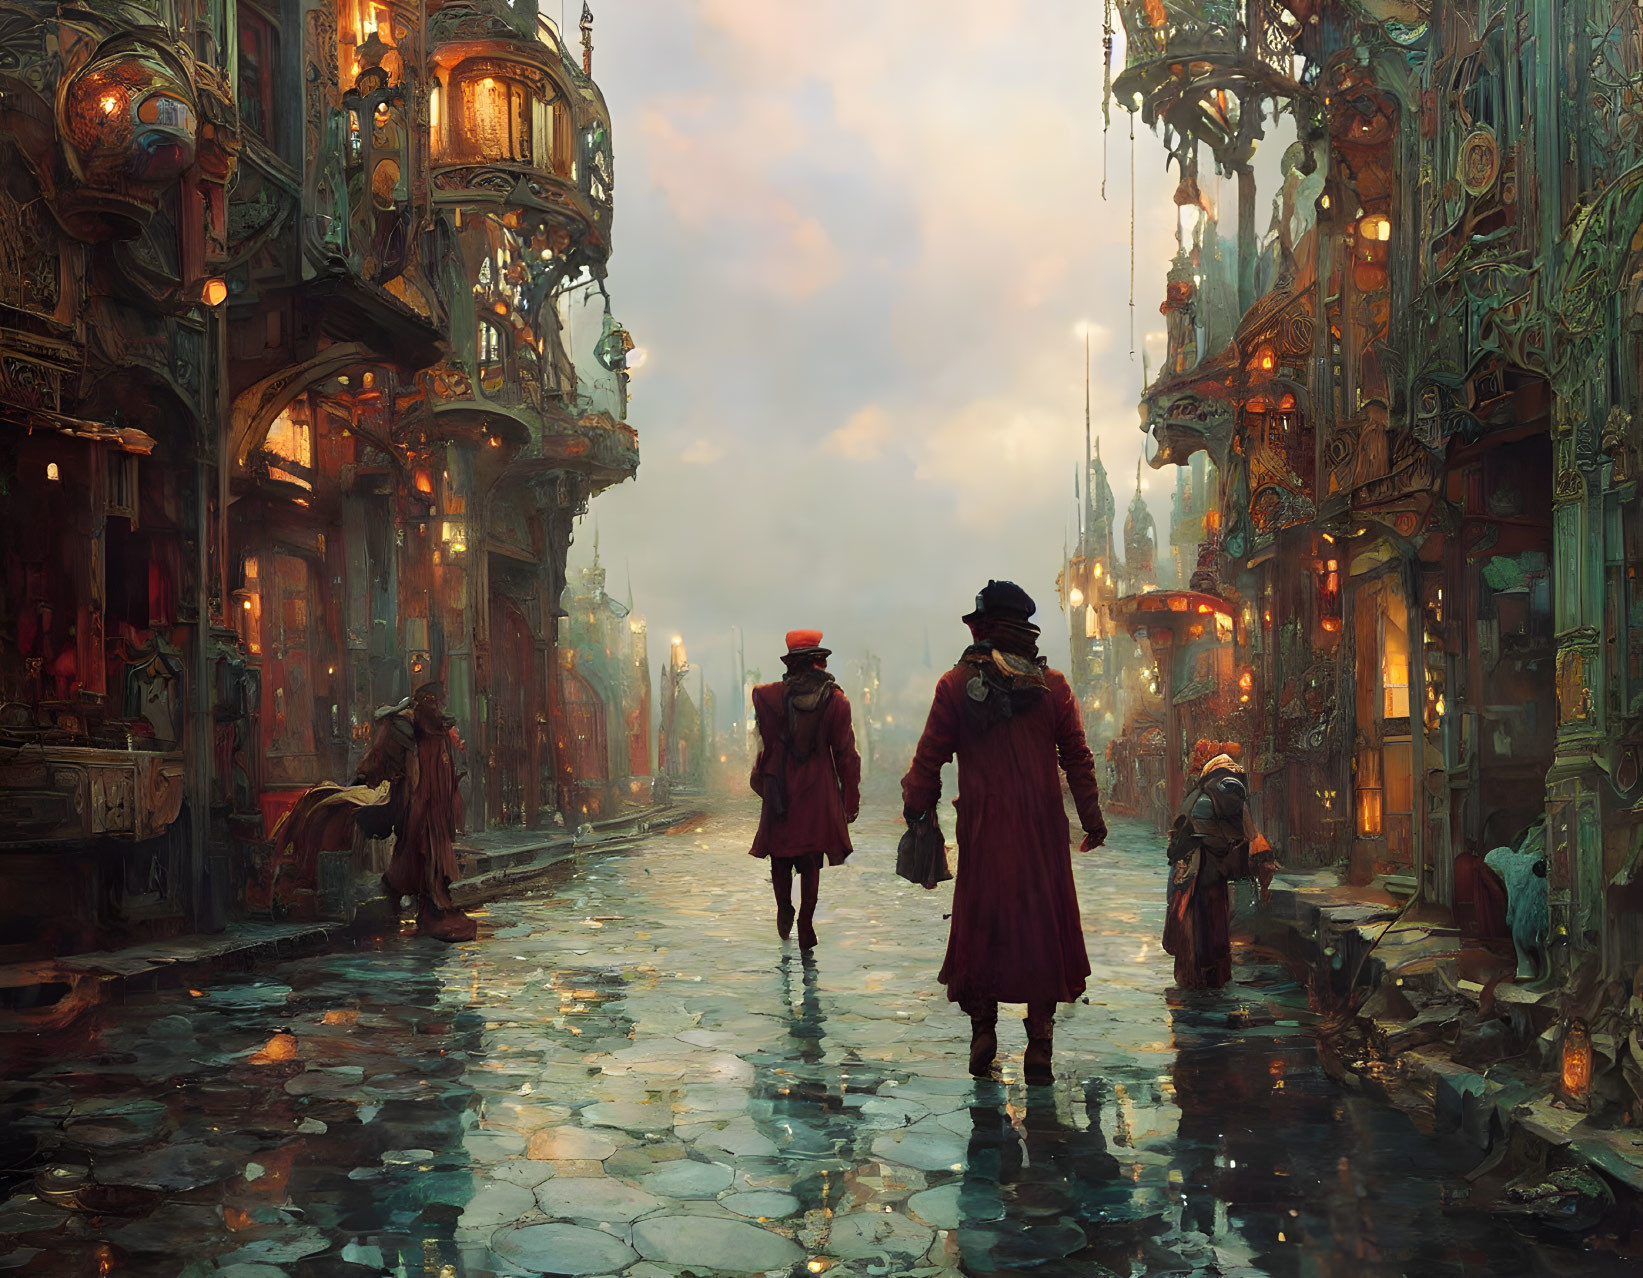 Pair in Red Coats and Tricorn Hats Explore Steampunk City